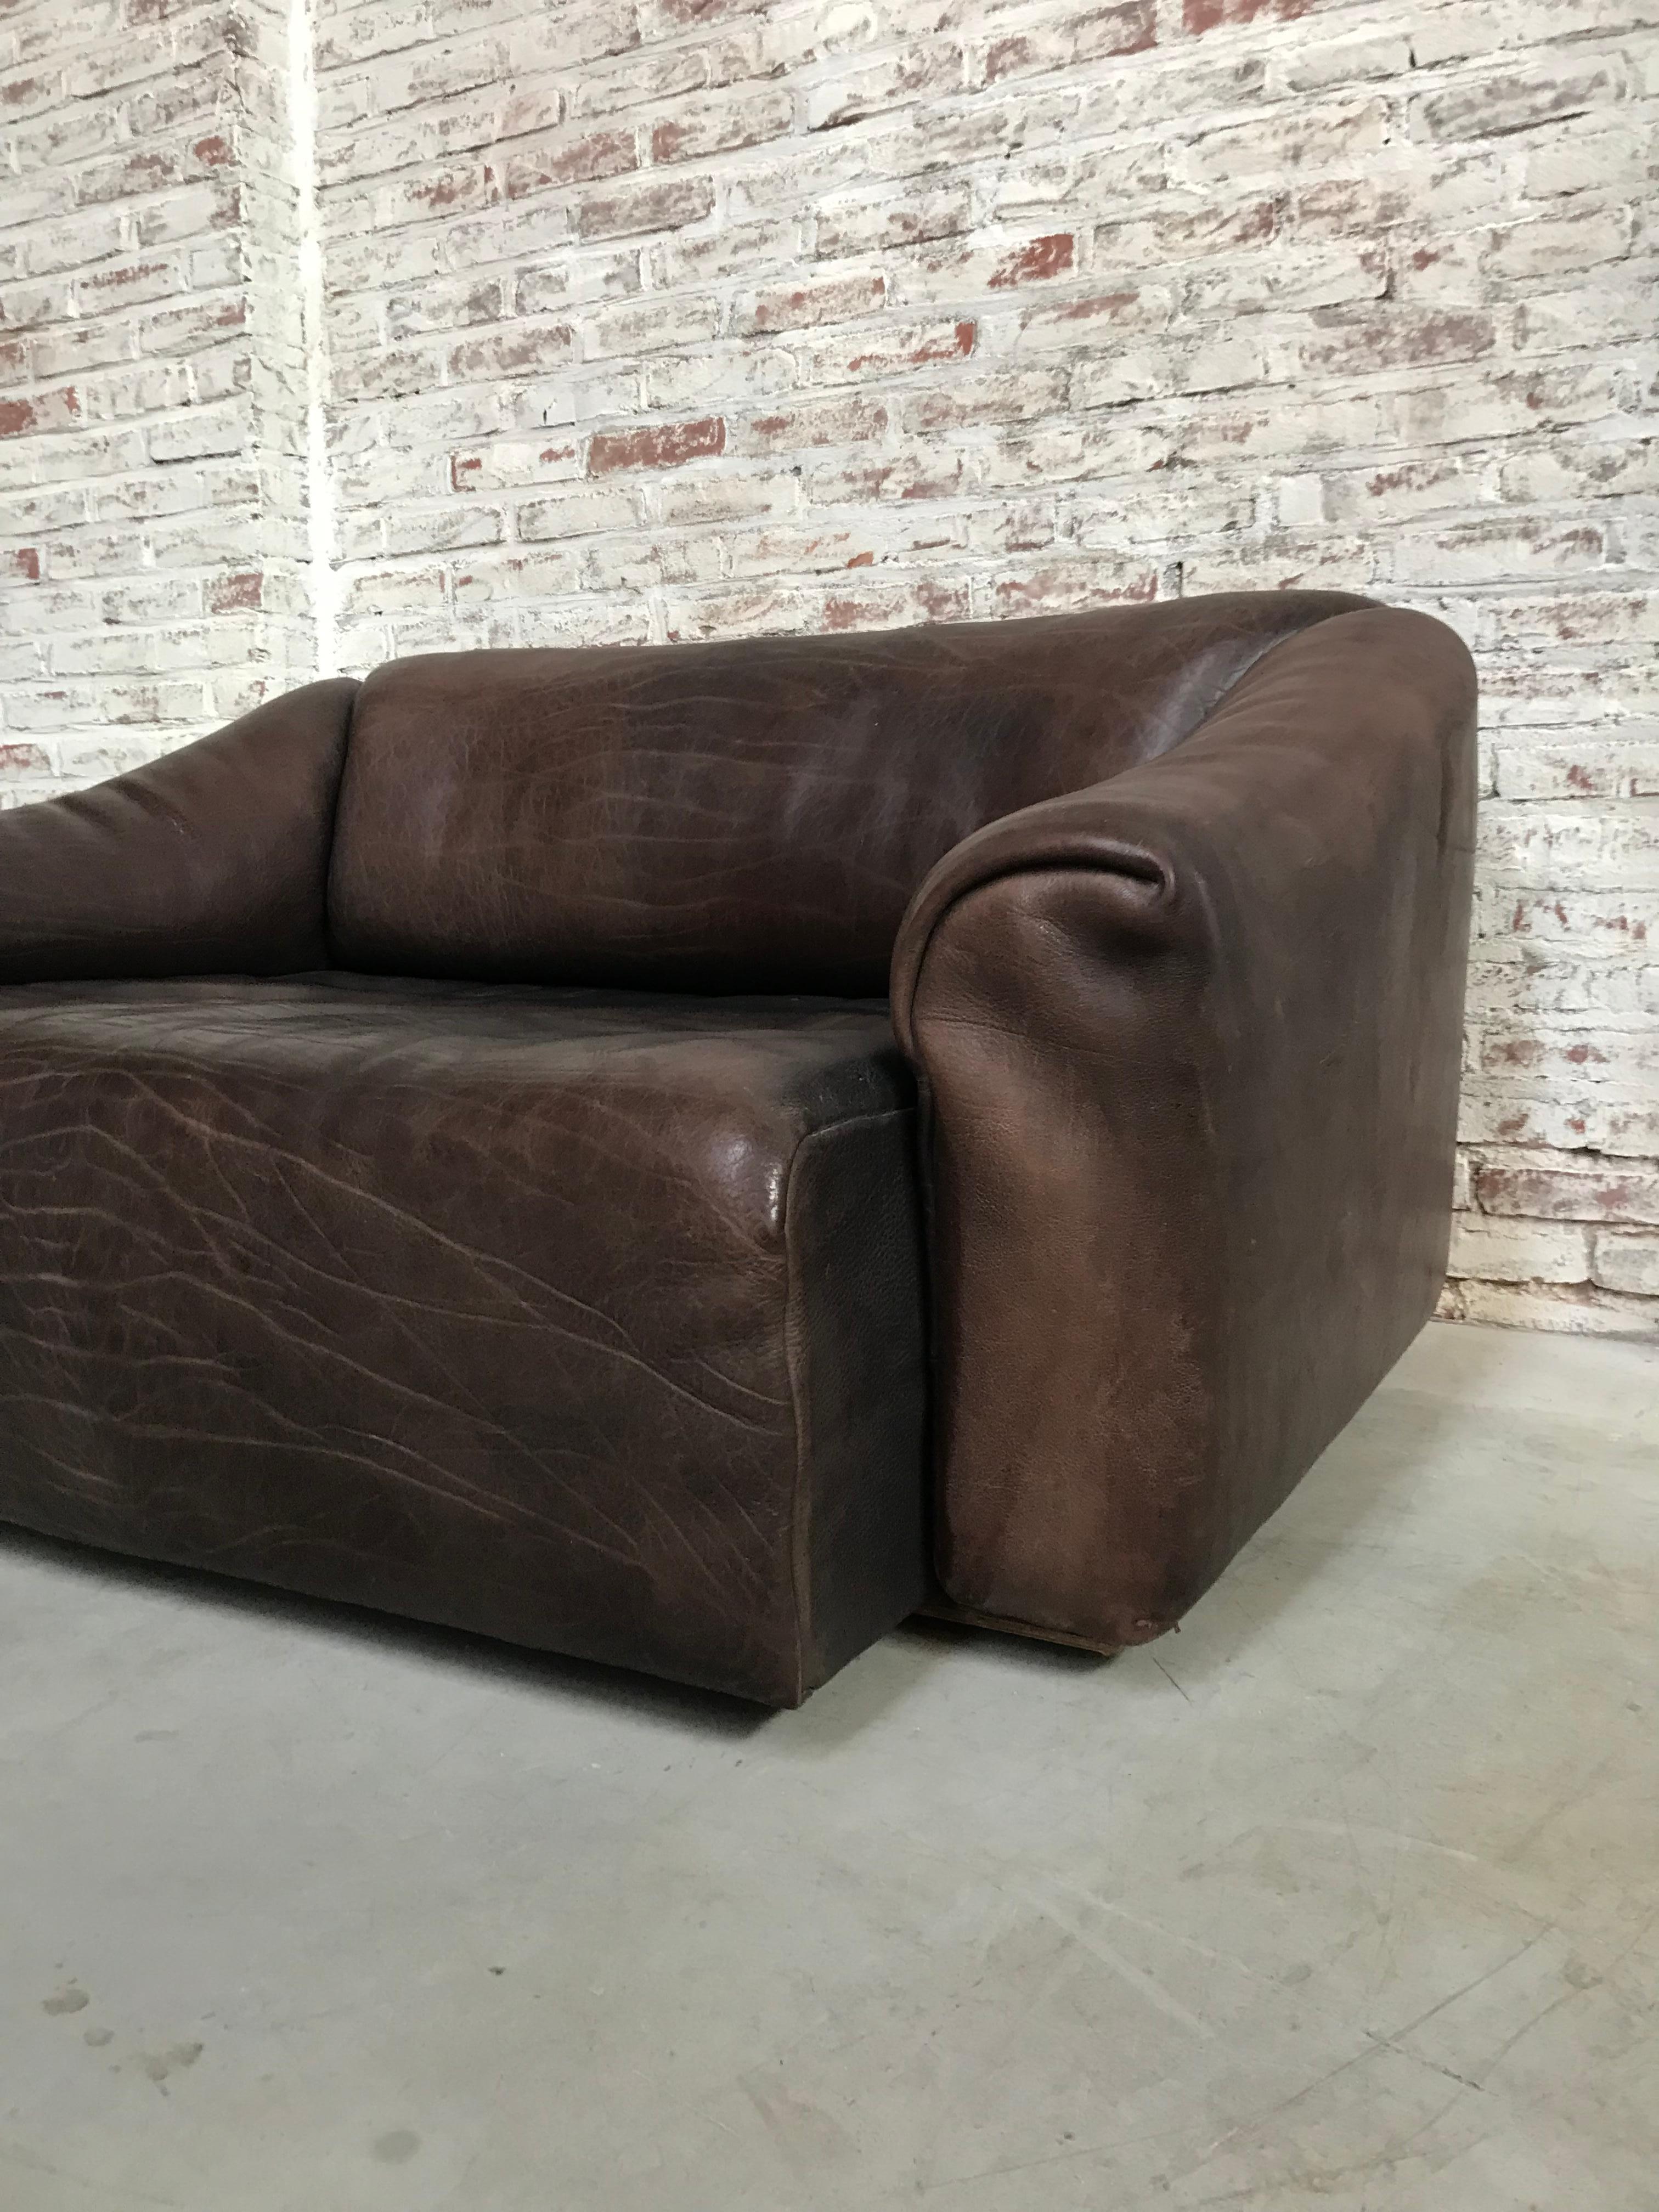 Midcentury Swiss De Sede Ds-47 Two-Seat in Chocolat Neck Leather, 1970s For Sale 4